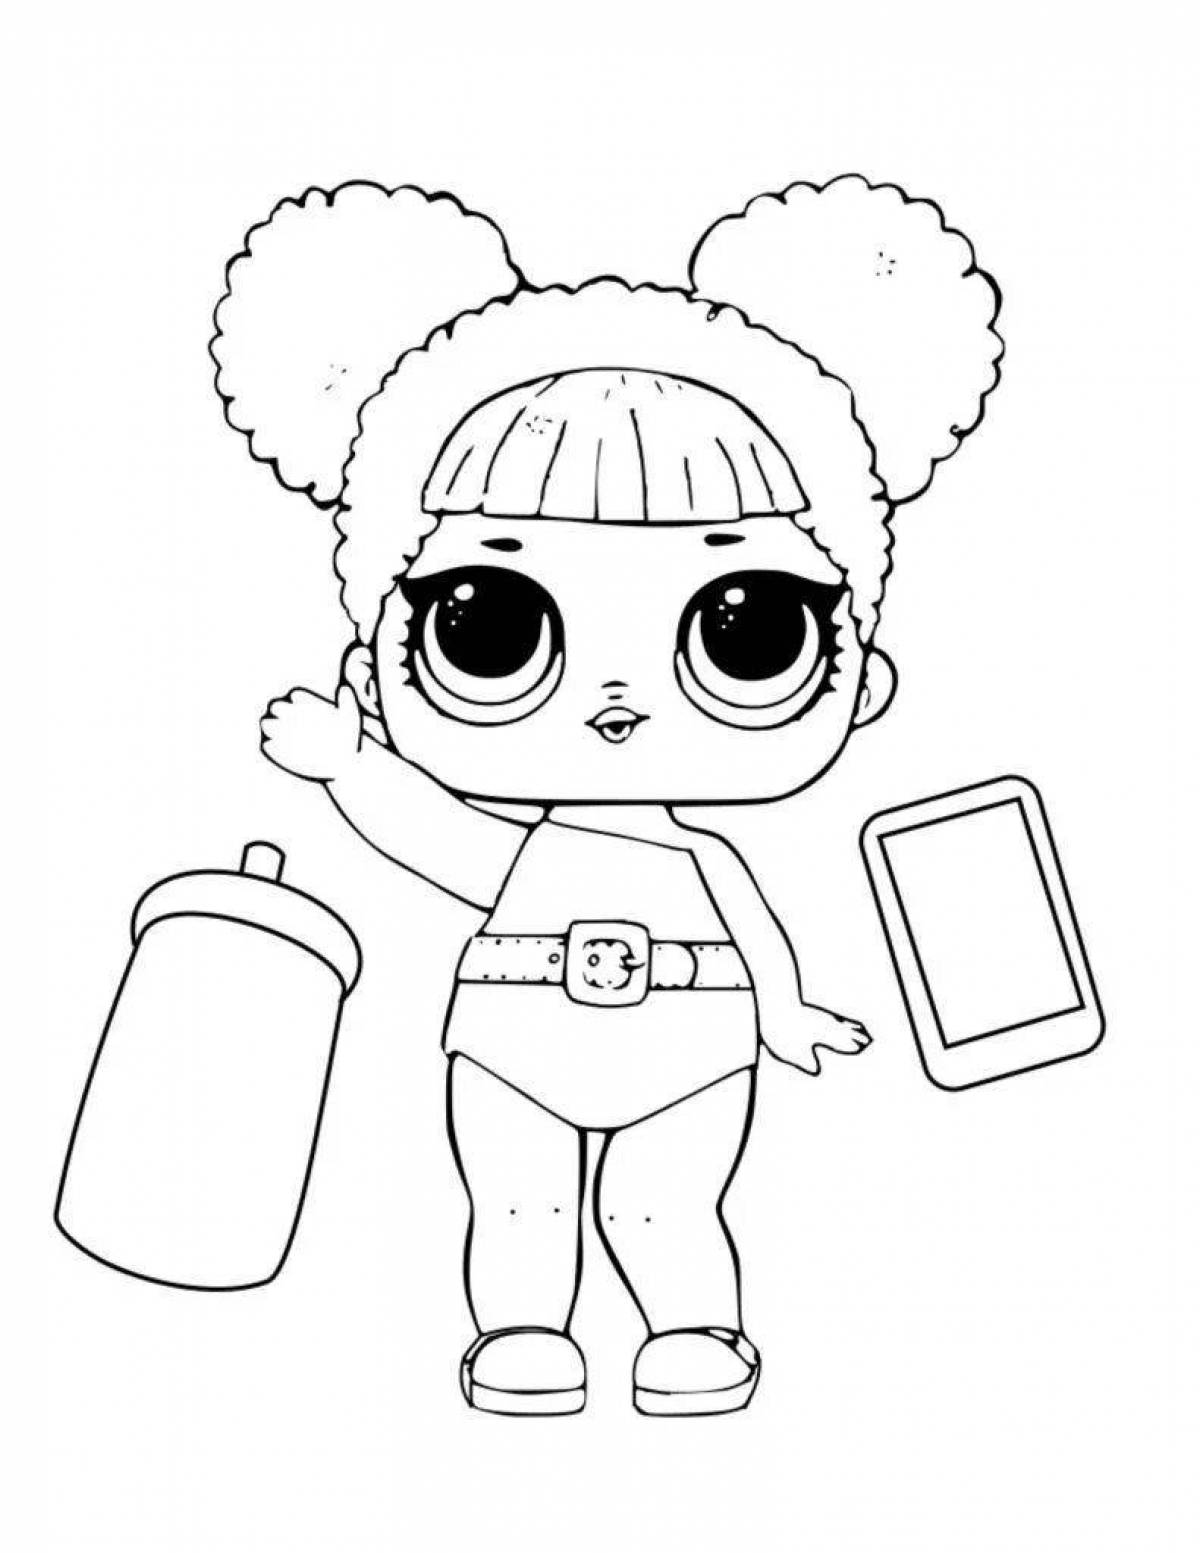 Animated lol blot coloring page